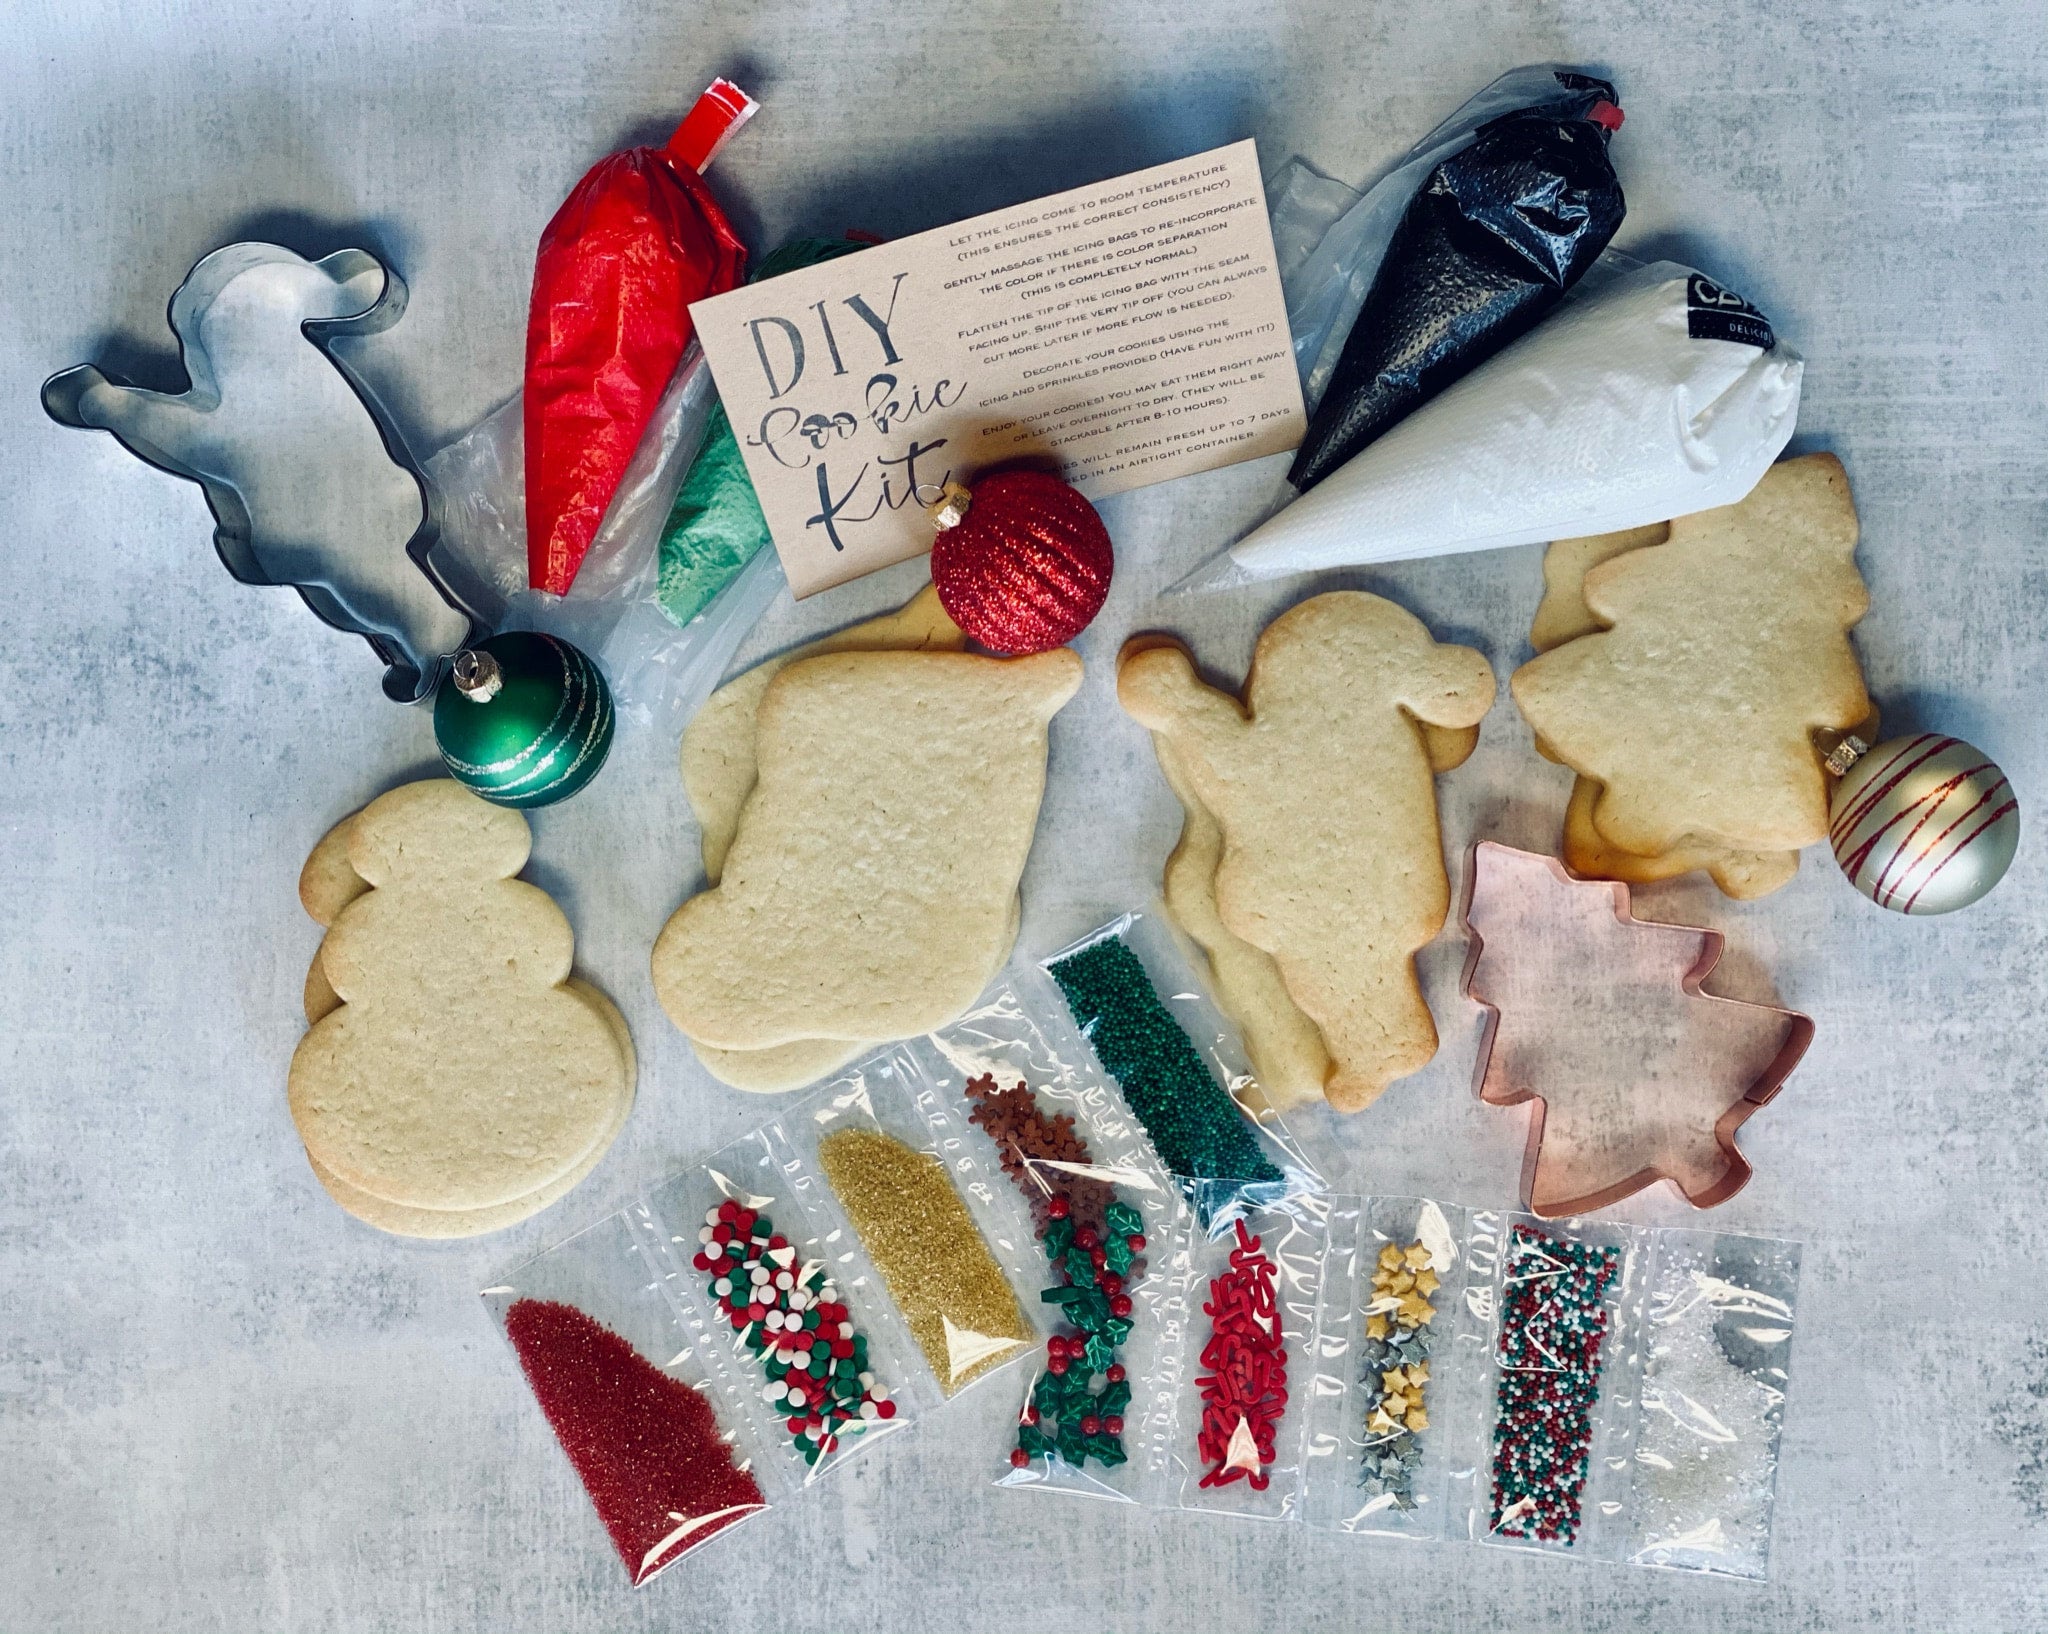 How to make Creative Cookie Decorating Kits 